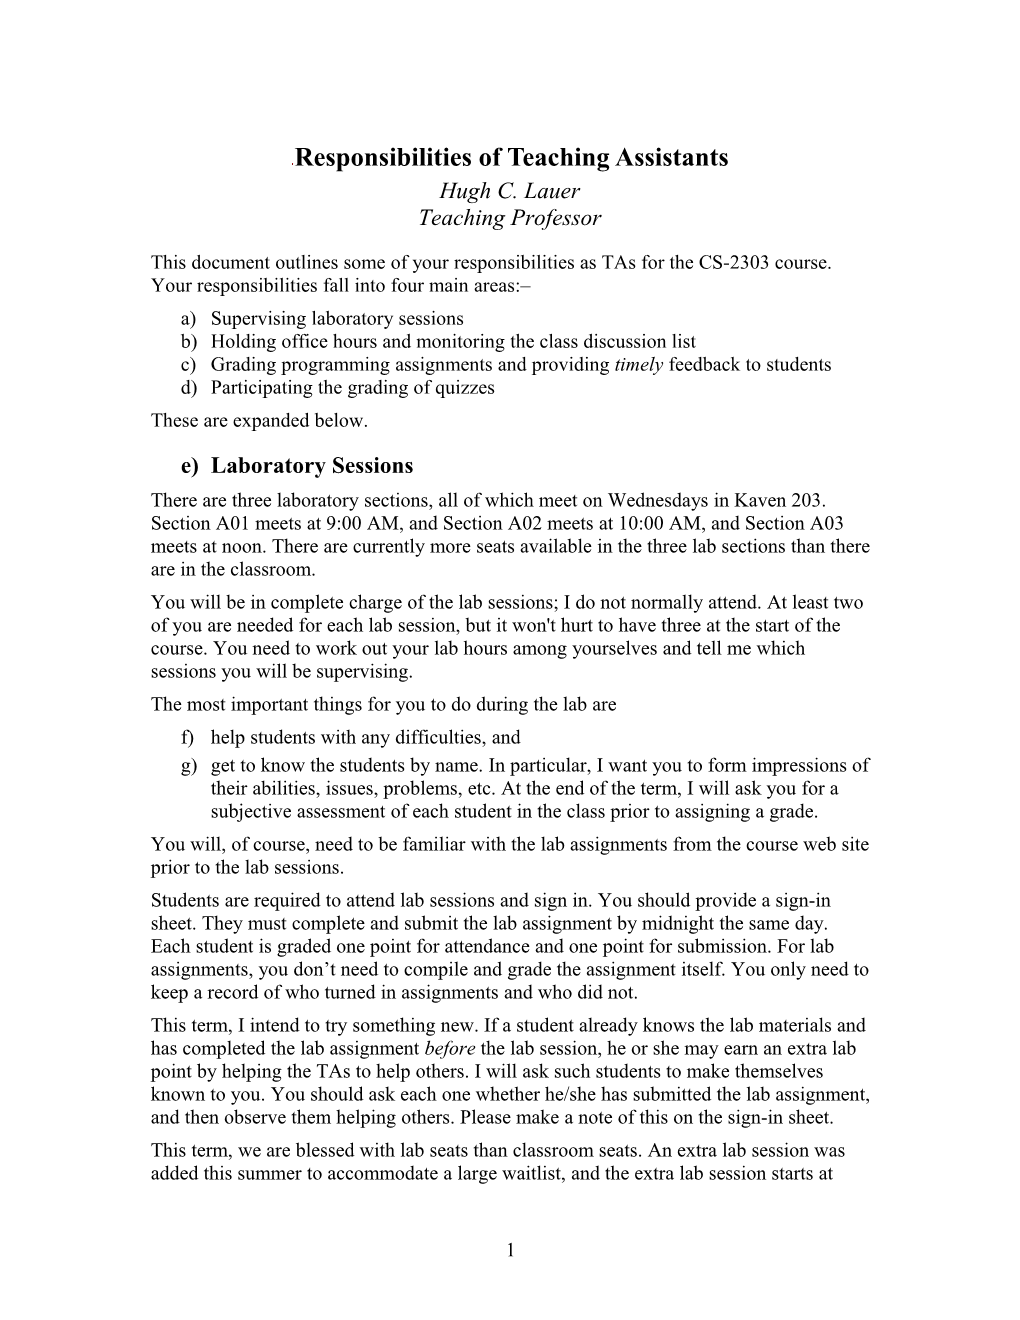 Responsibilities of Teaching and Student Assistants